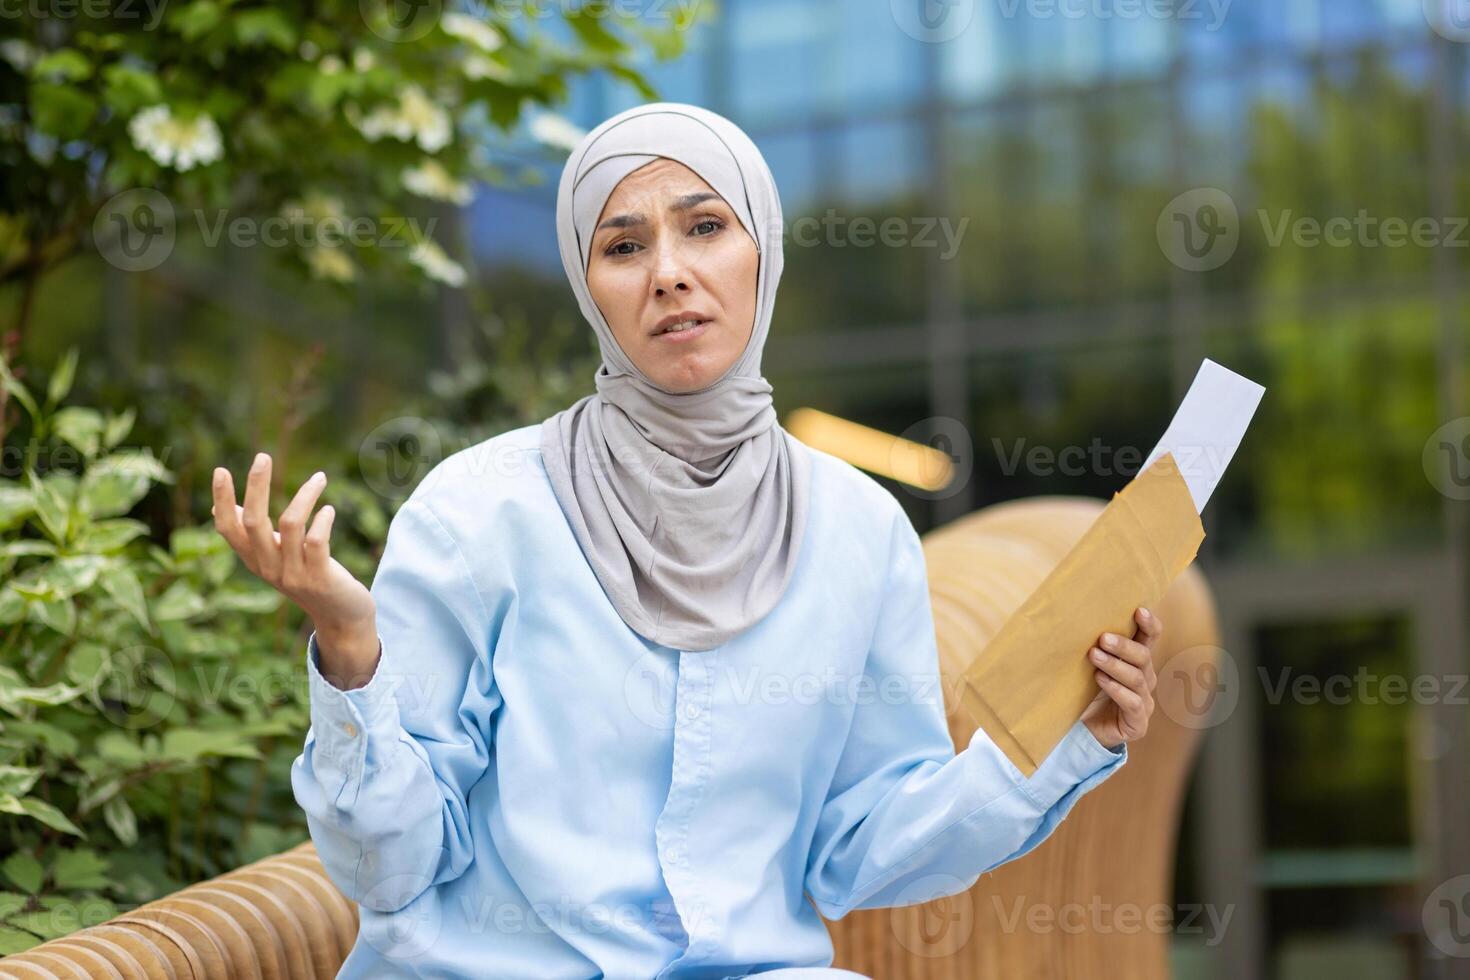 A woman in a hijab appears puzzled with an envelope in her hand, standing outside a modern building. photo